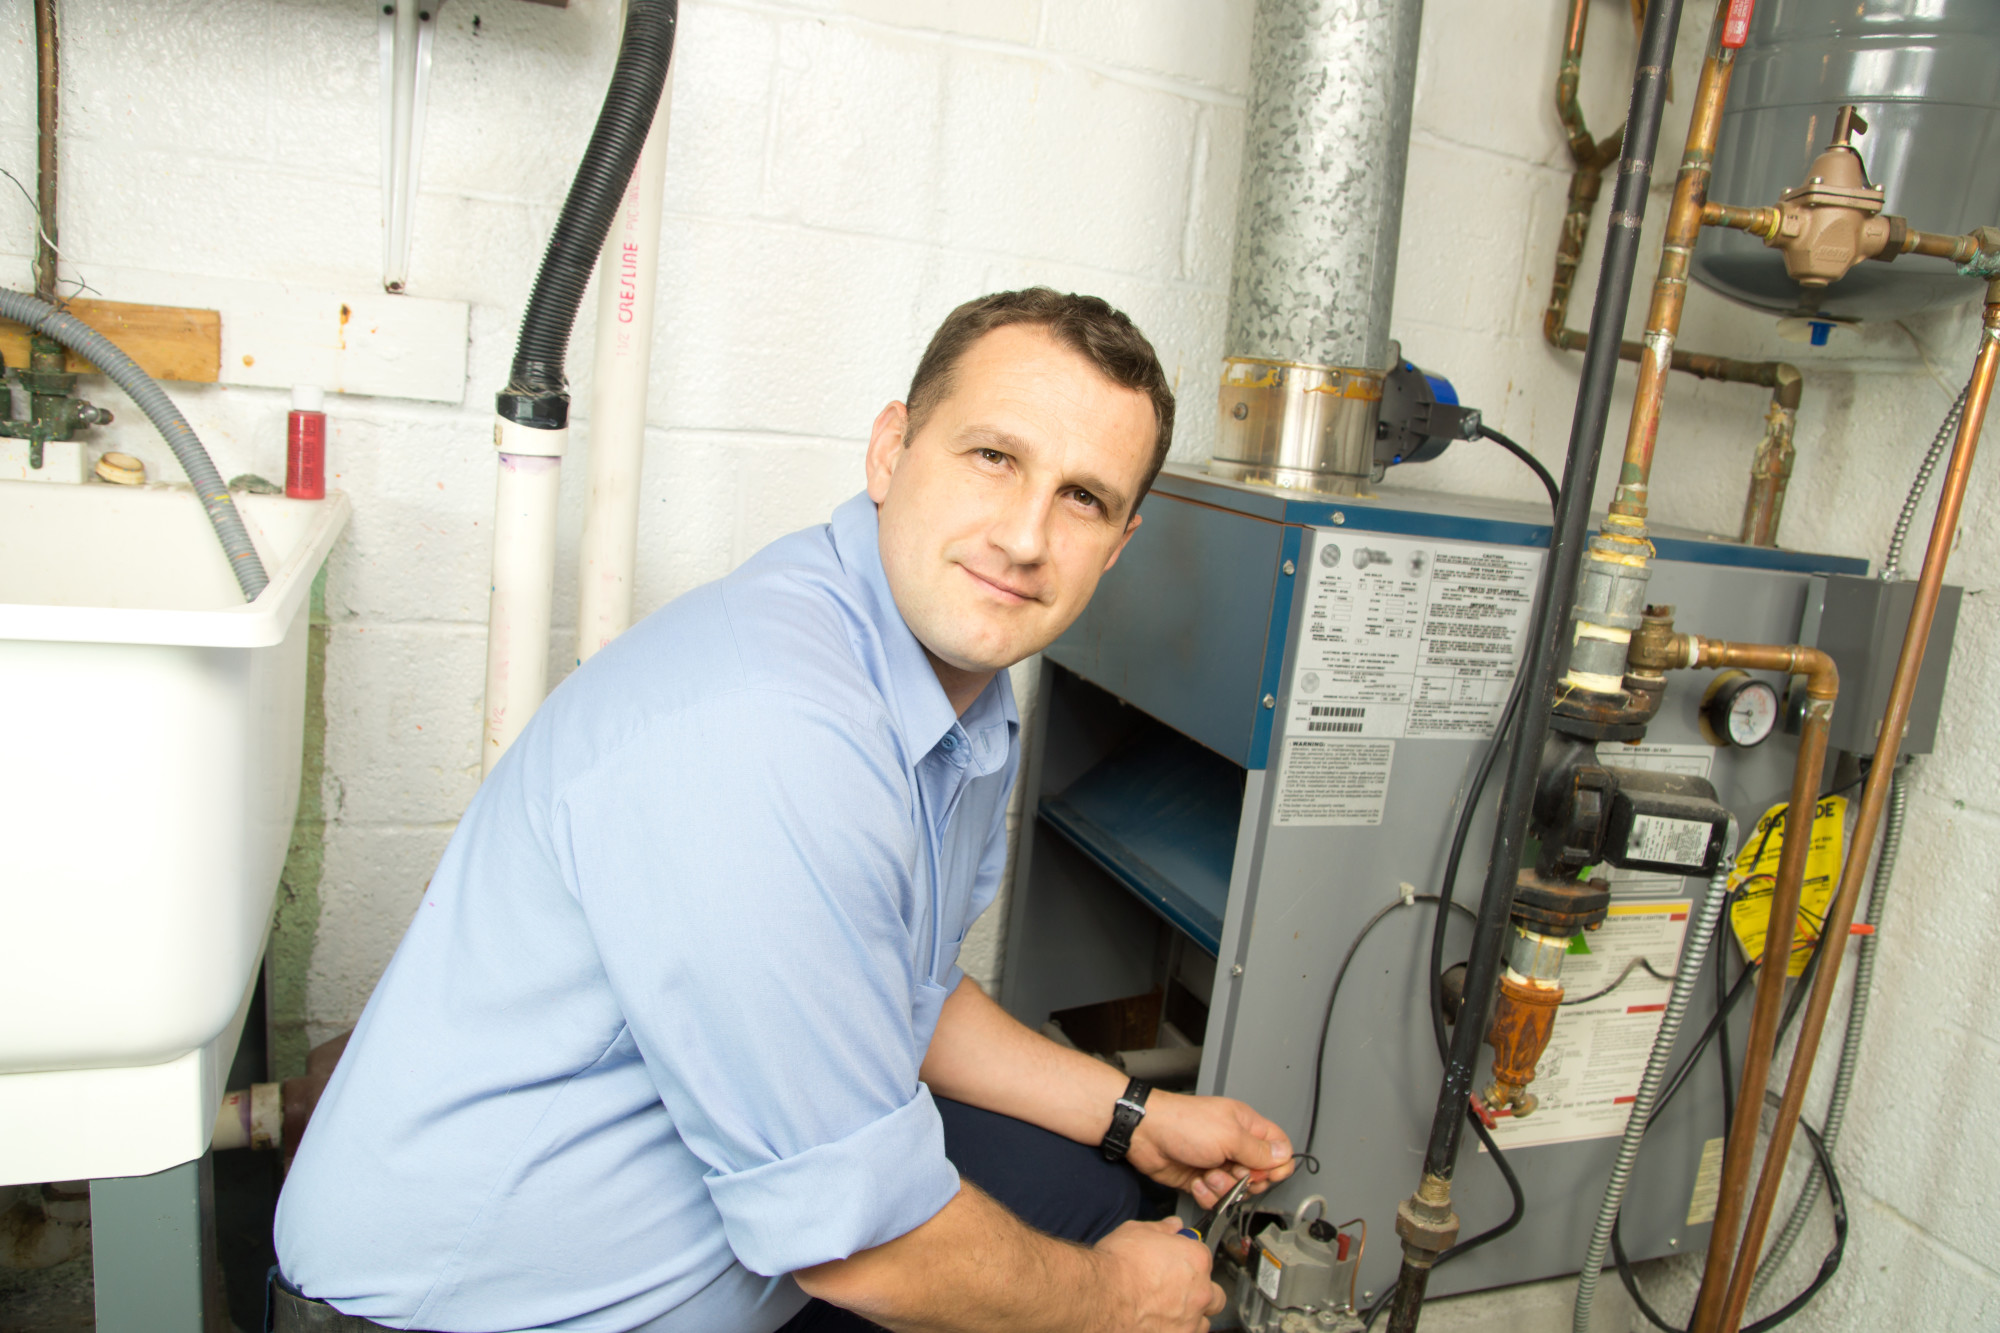 Is Your Furnace Not Working? Follow These Troubleshooting Steps